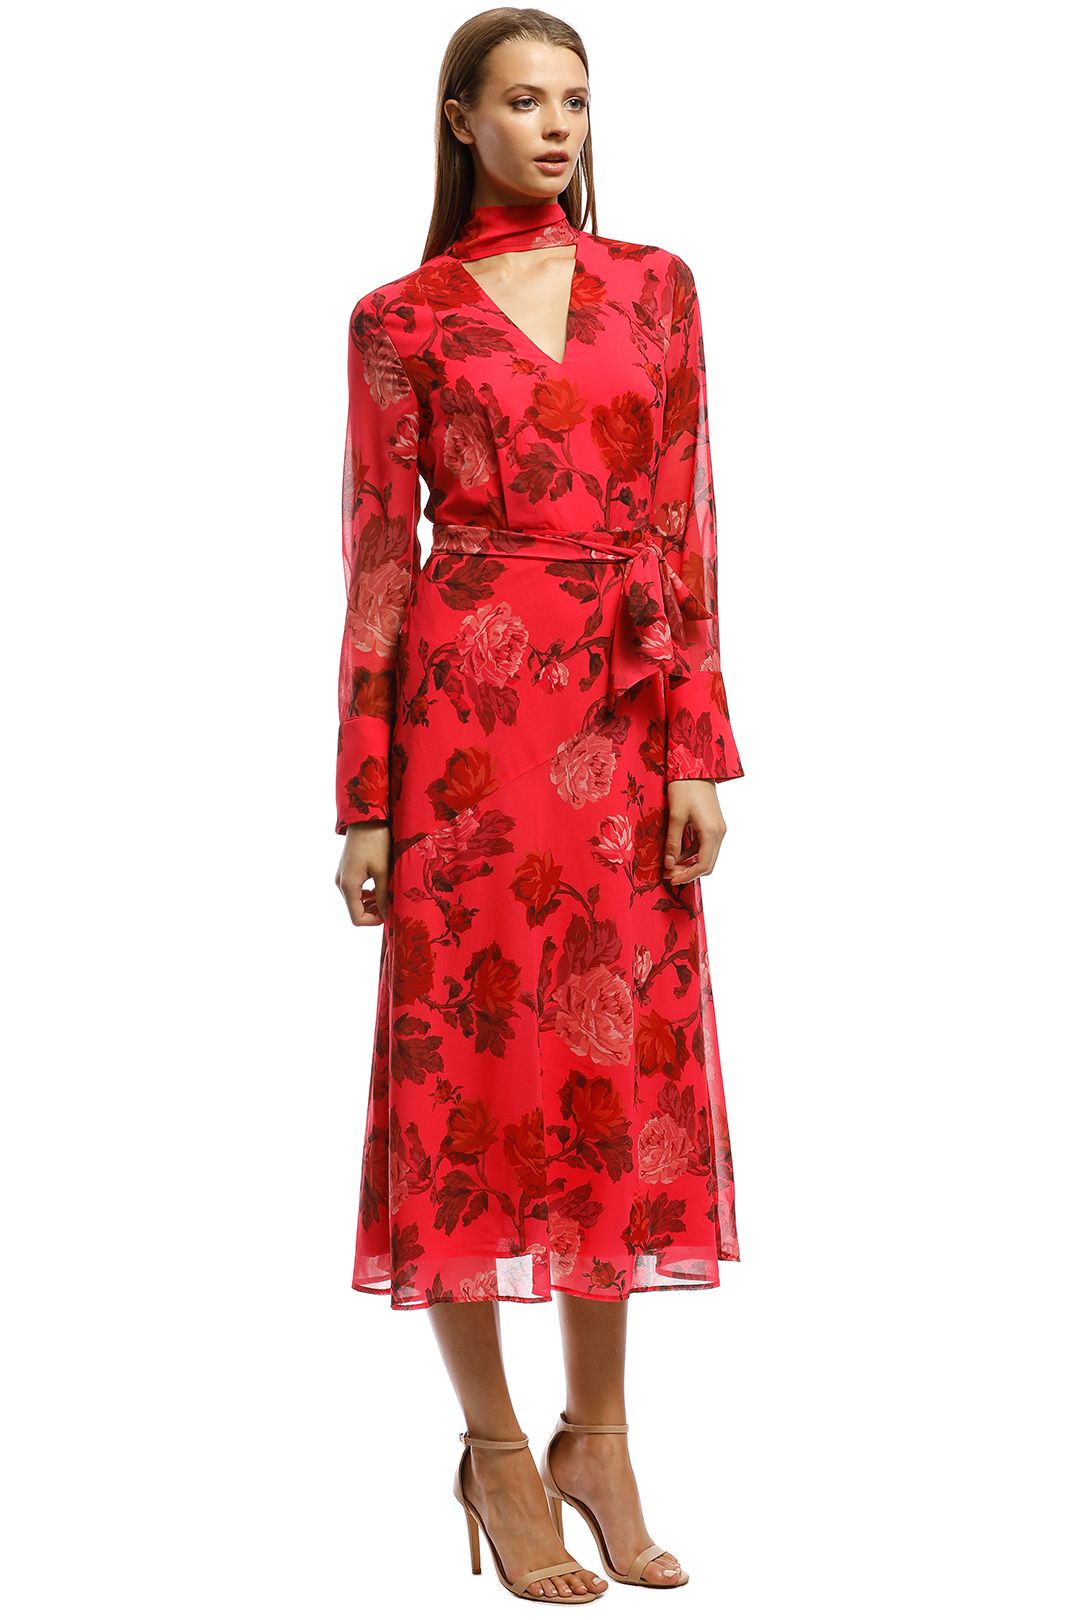 CMEO Collective - Variation LS Midi Dress - Red - Side